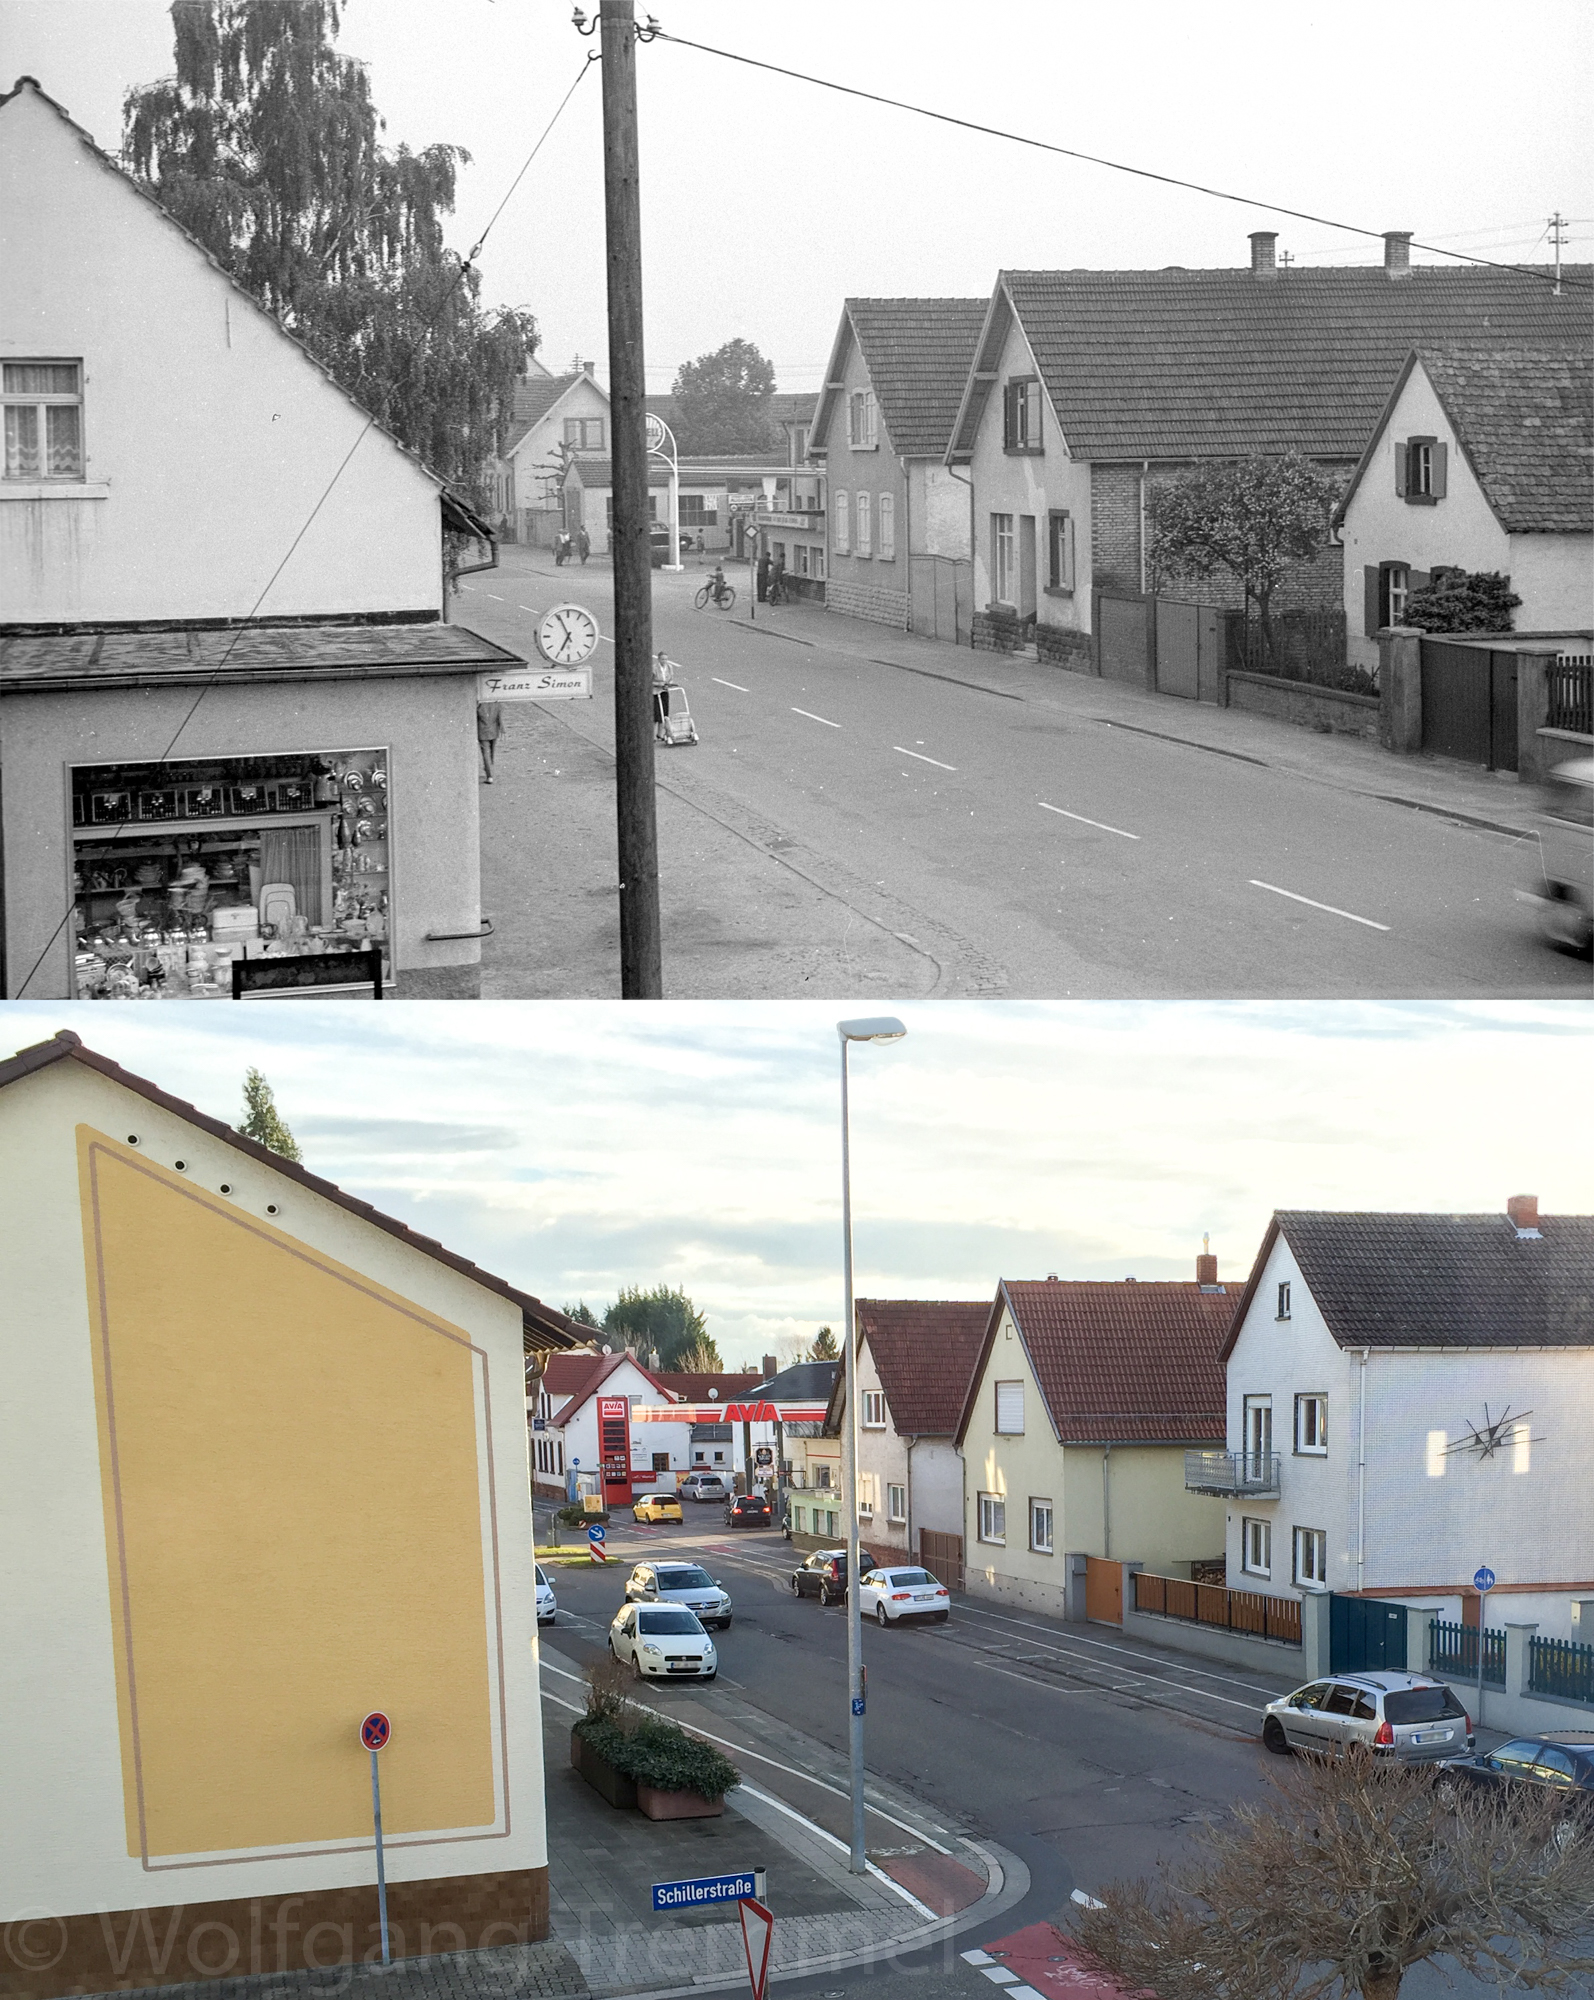 Now and then: 1960 – 2015